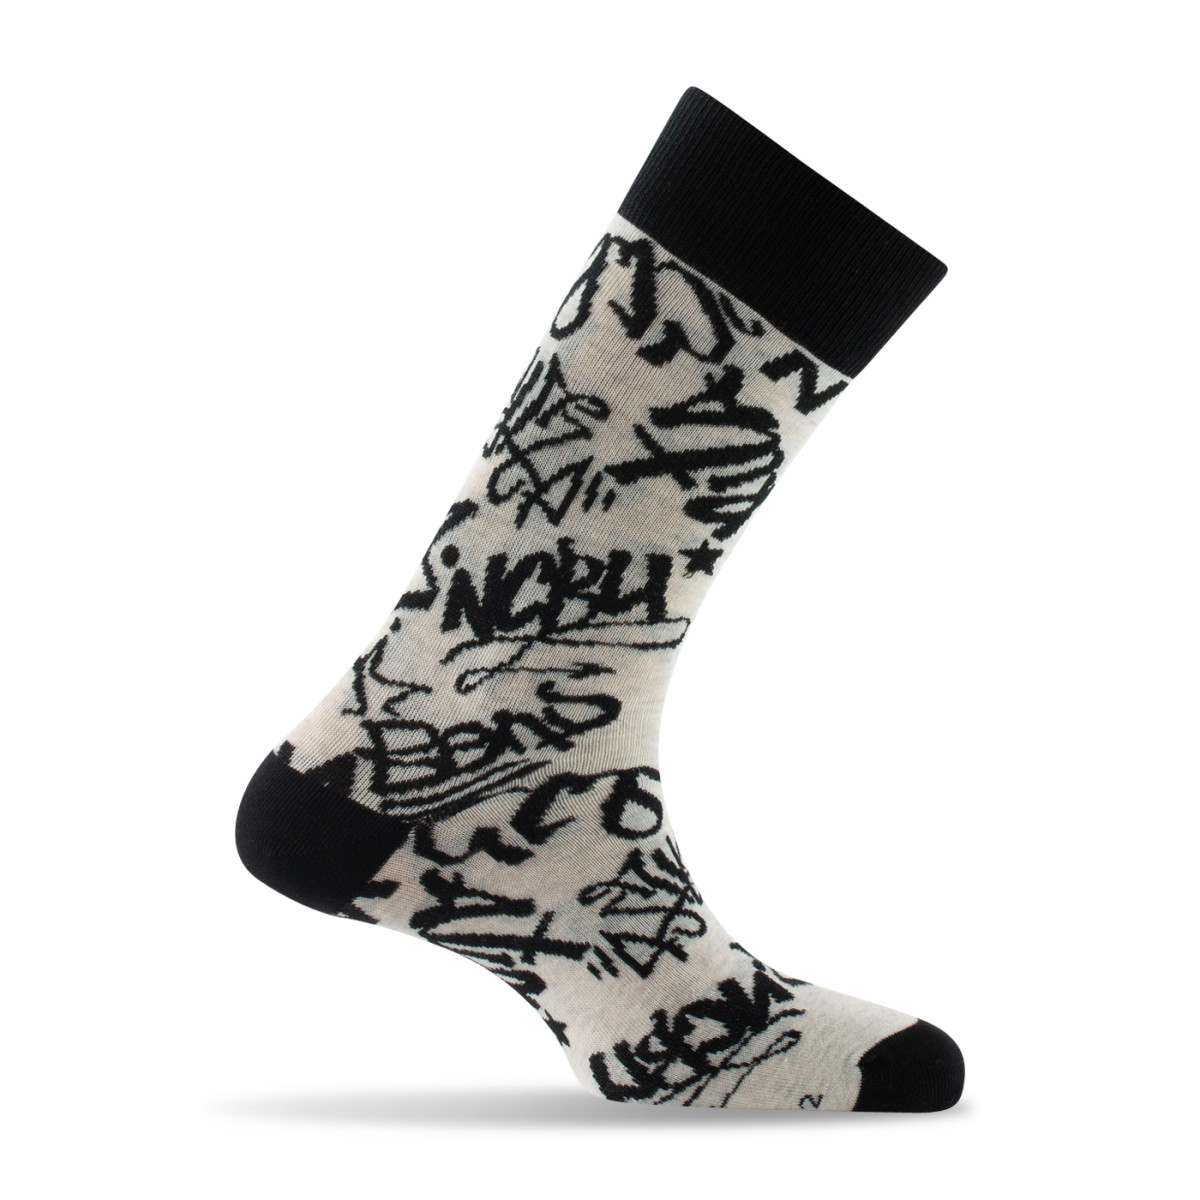 Mi-chaussettes homme coton jersey graff Made in France - Chaussettes Femme  | Kindy